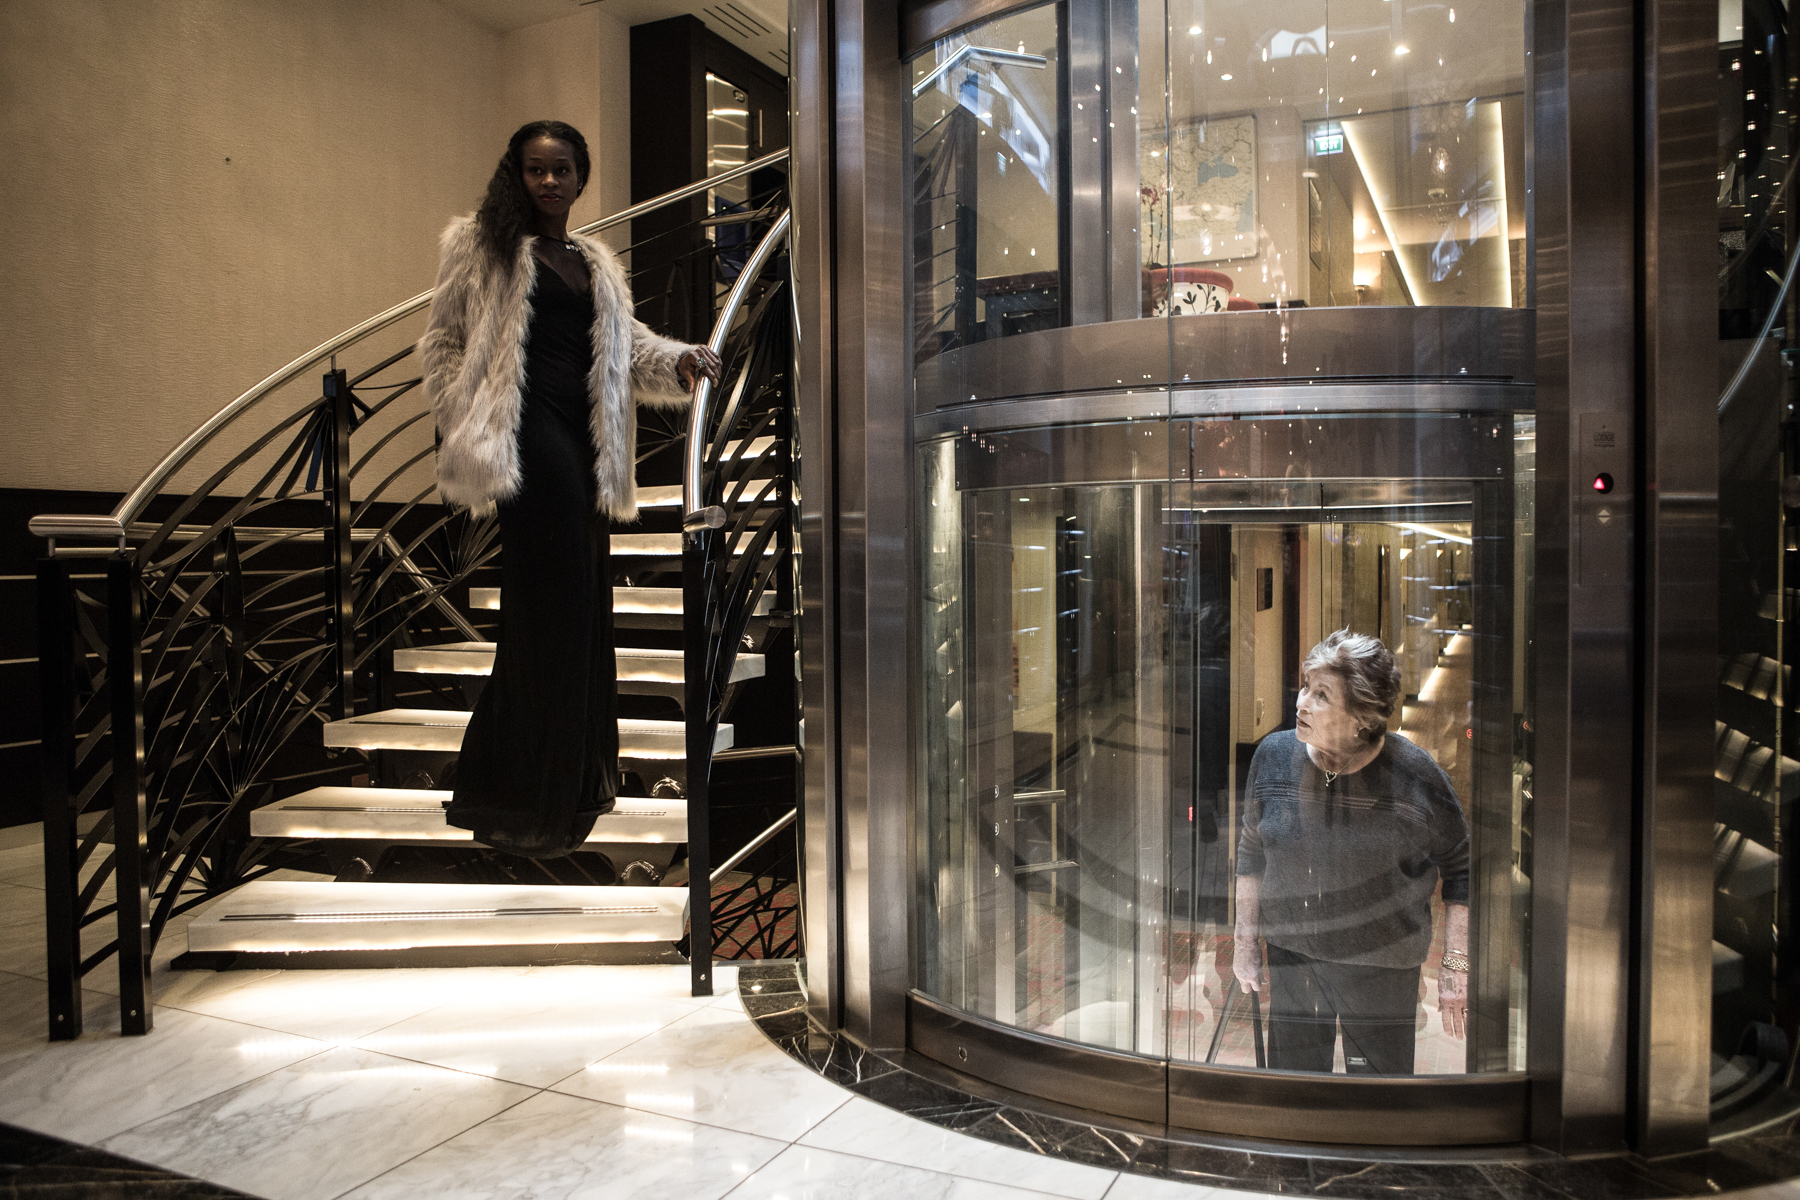 A model is walking down the stairy of a tourist river boat while another woman that is using a transparent elevator watches her